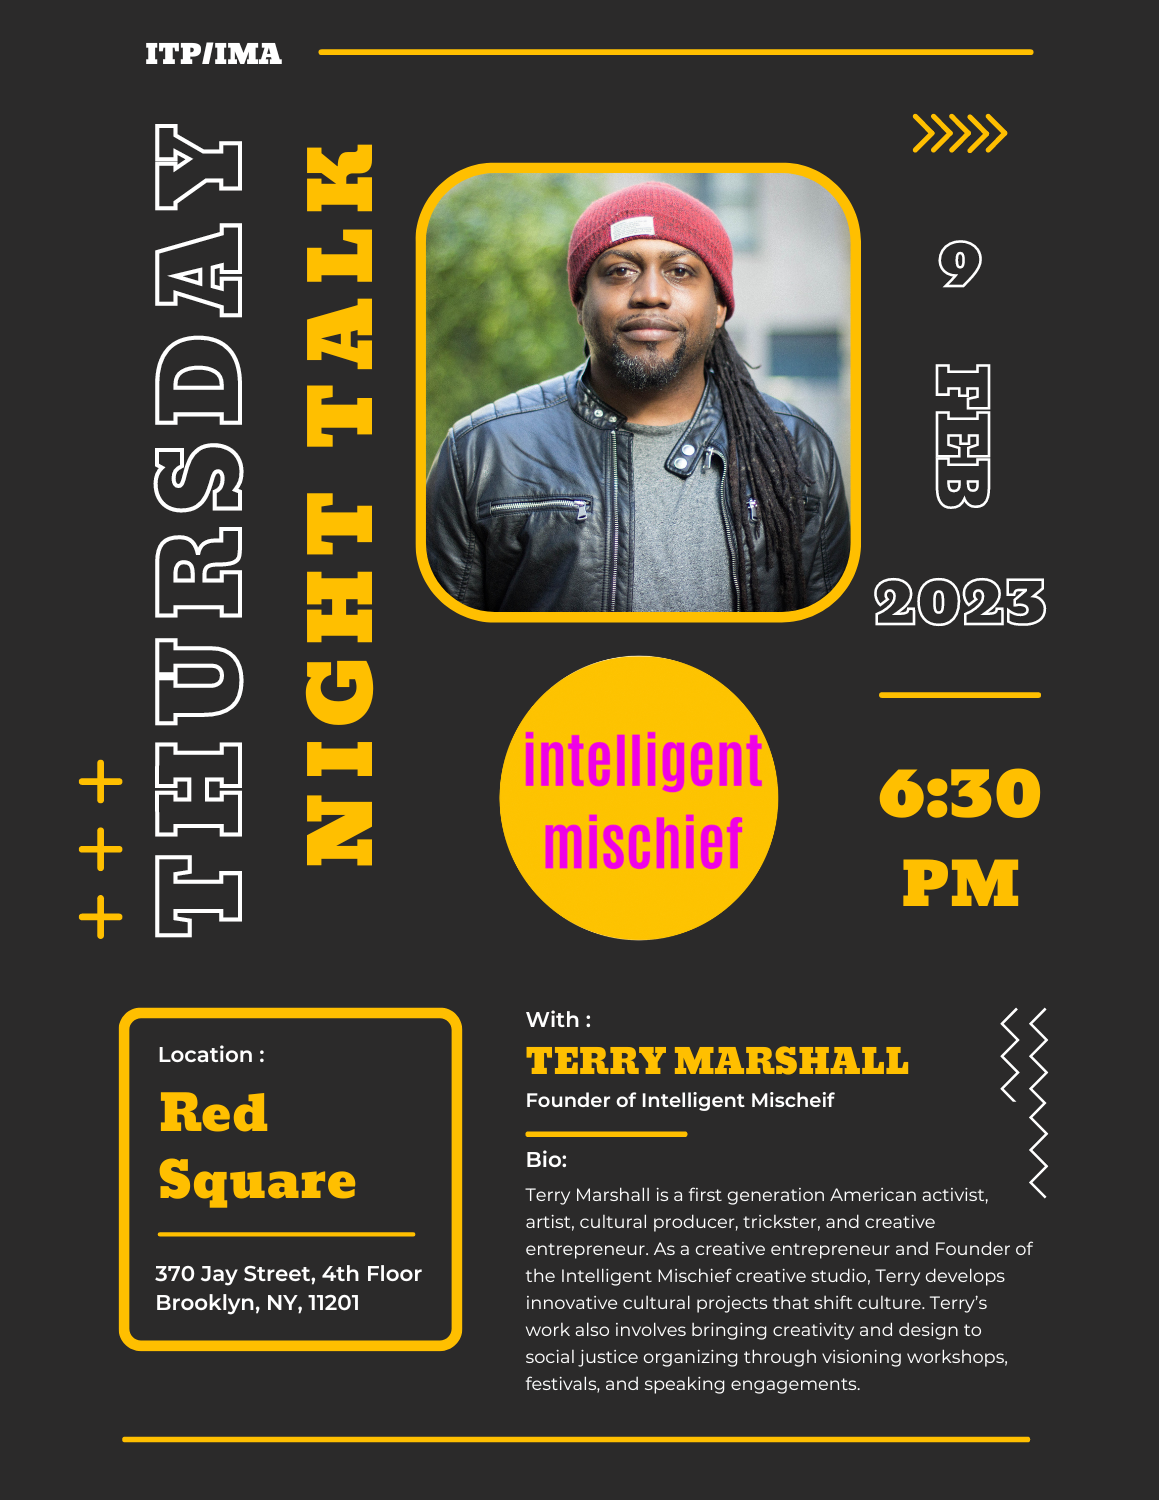 Join us as we learn more about Terry Marshall and his creative studio, Intelligent Mischief.